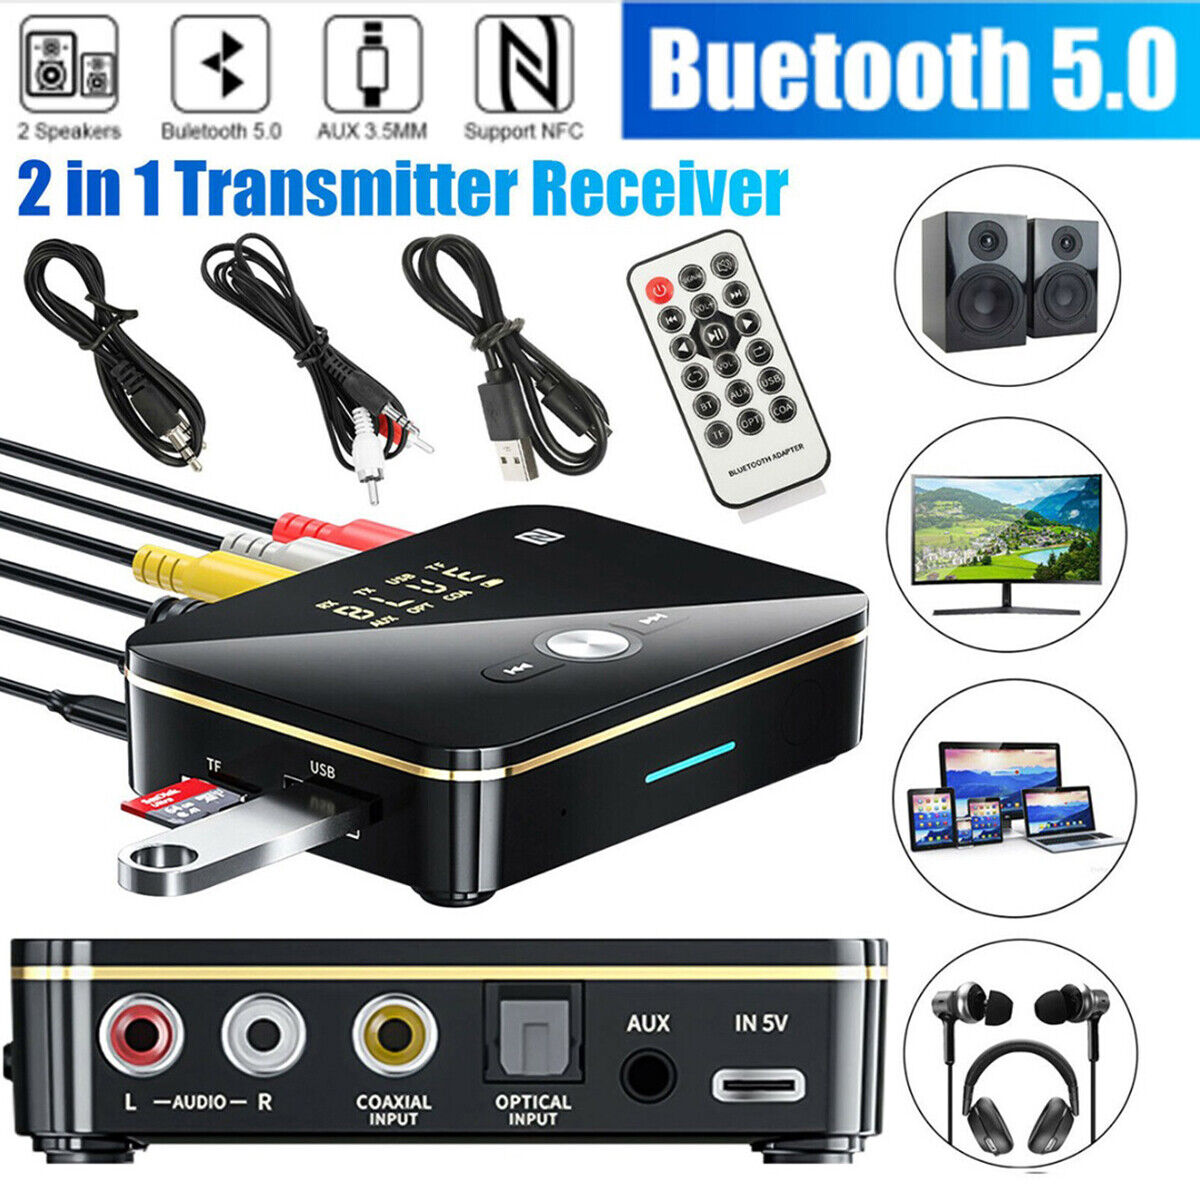 USB NFC Bluetooth 5.0 Wireless Transmitter Receiver to 2RCA Stereo Audio Adapter